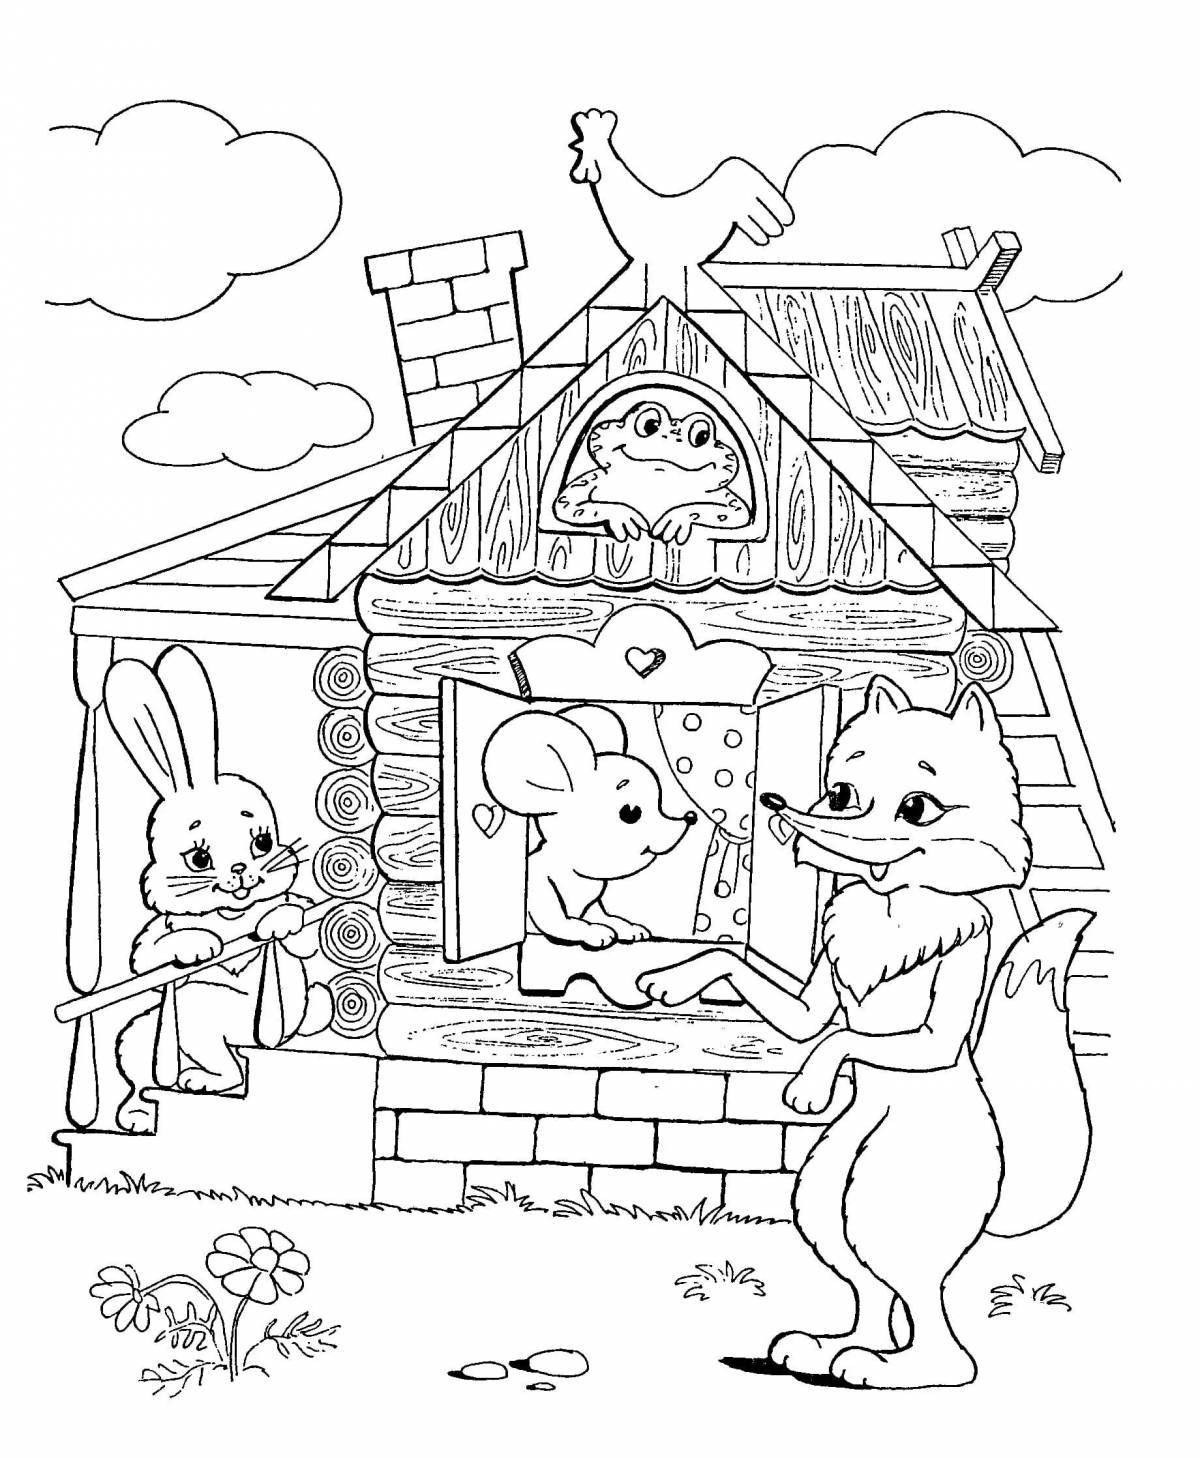 Fun character coloring house